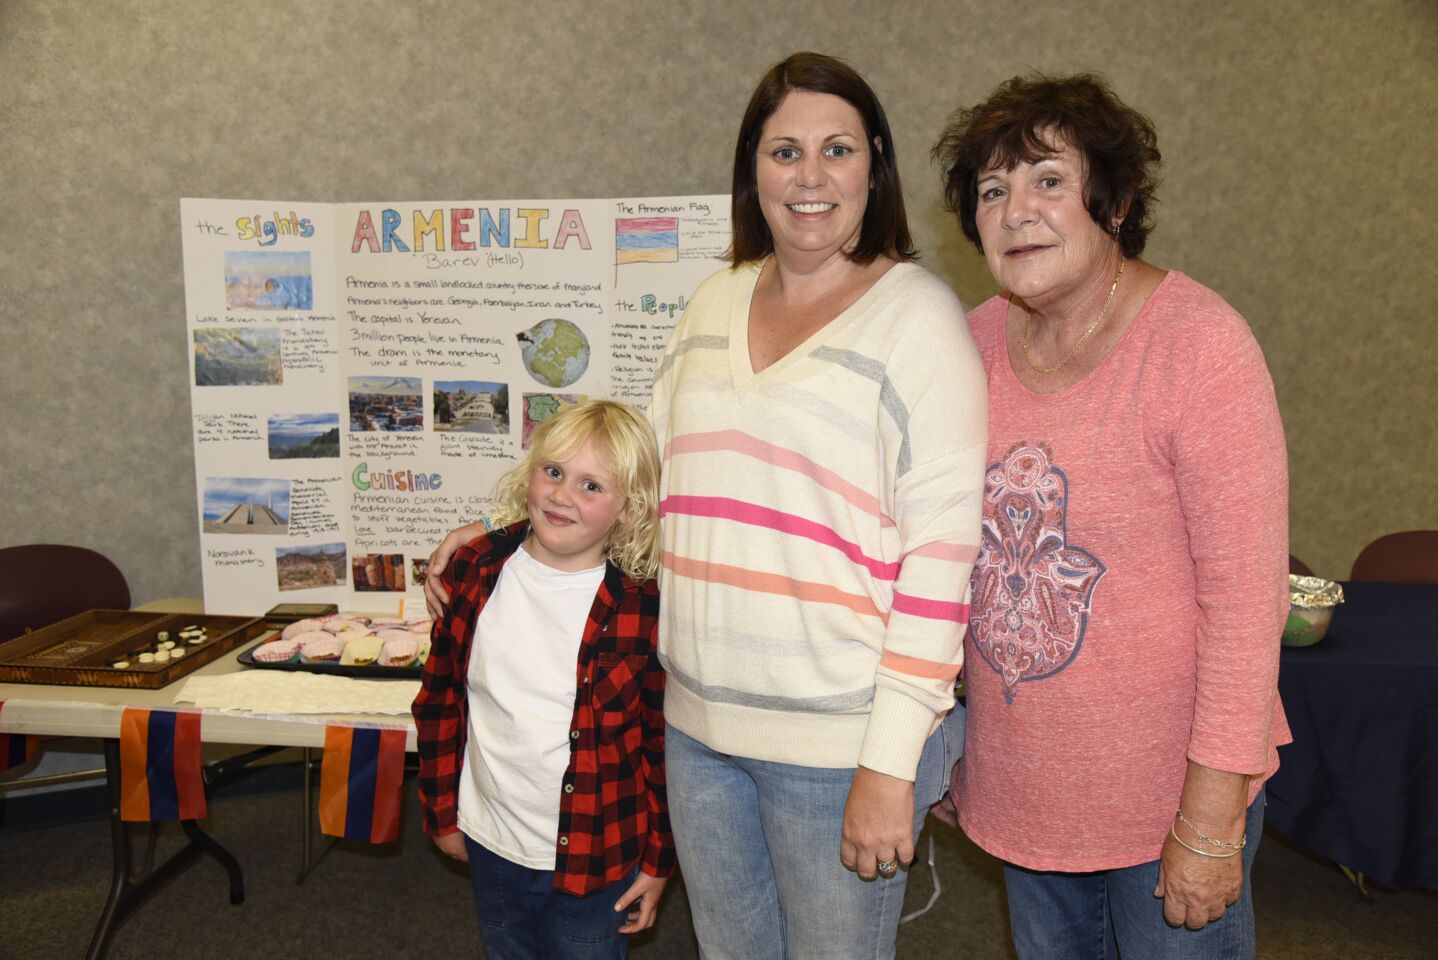 Representing Armenia is event co-chair Brittany Pambakian, with Poppy and Julie Braatz